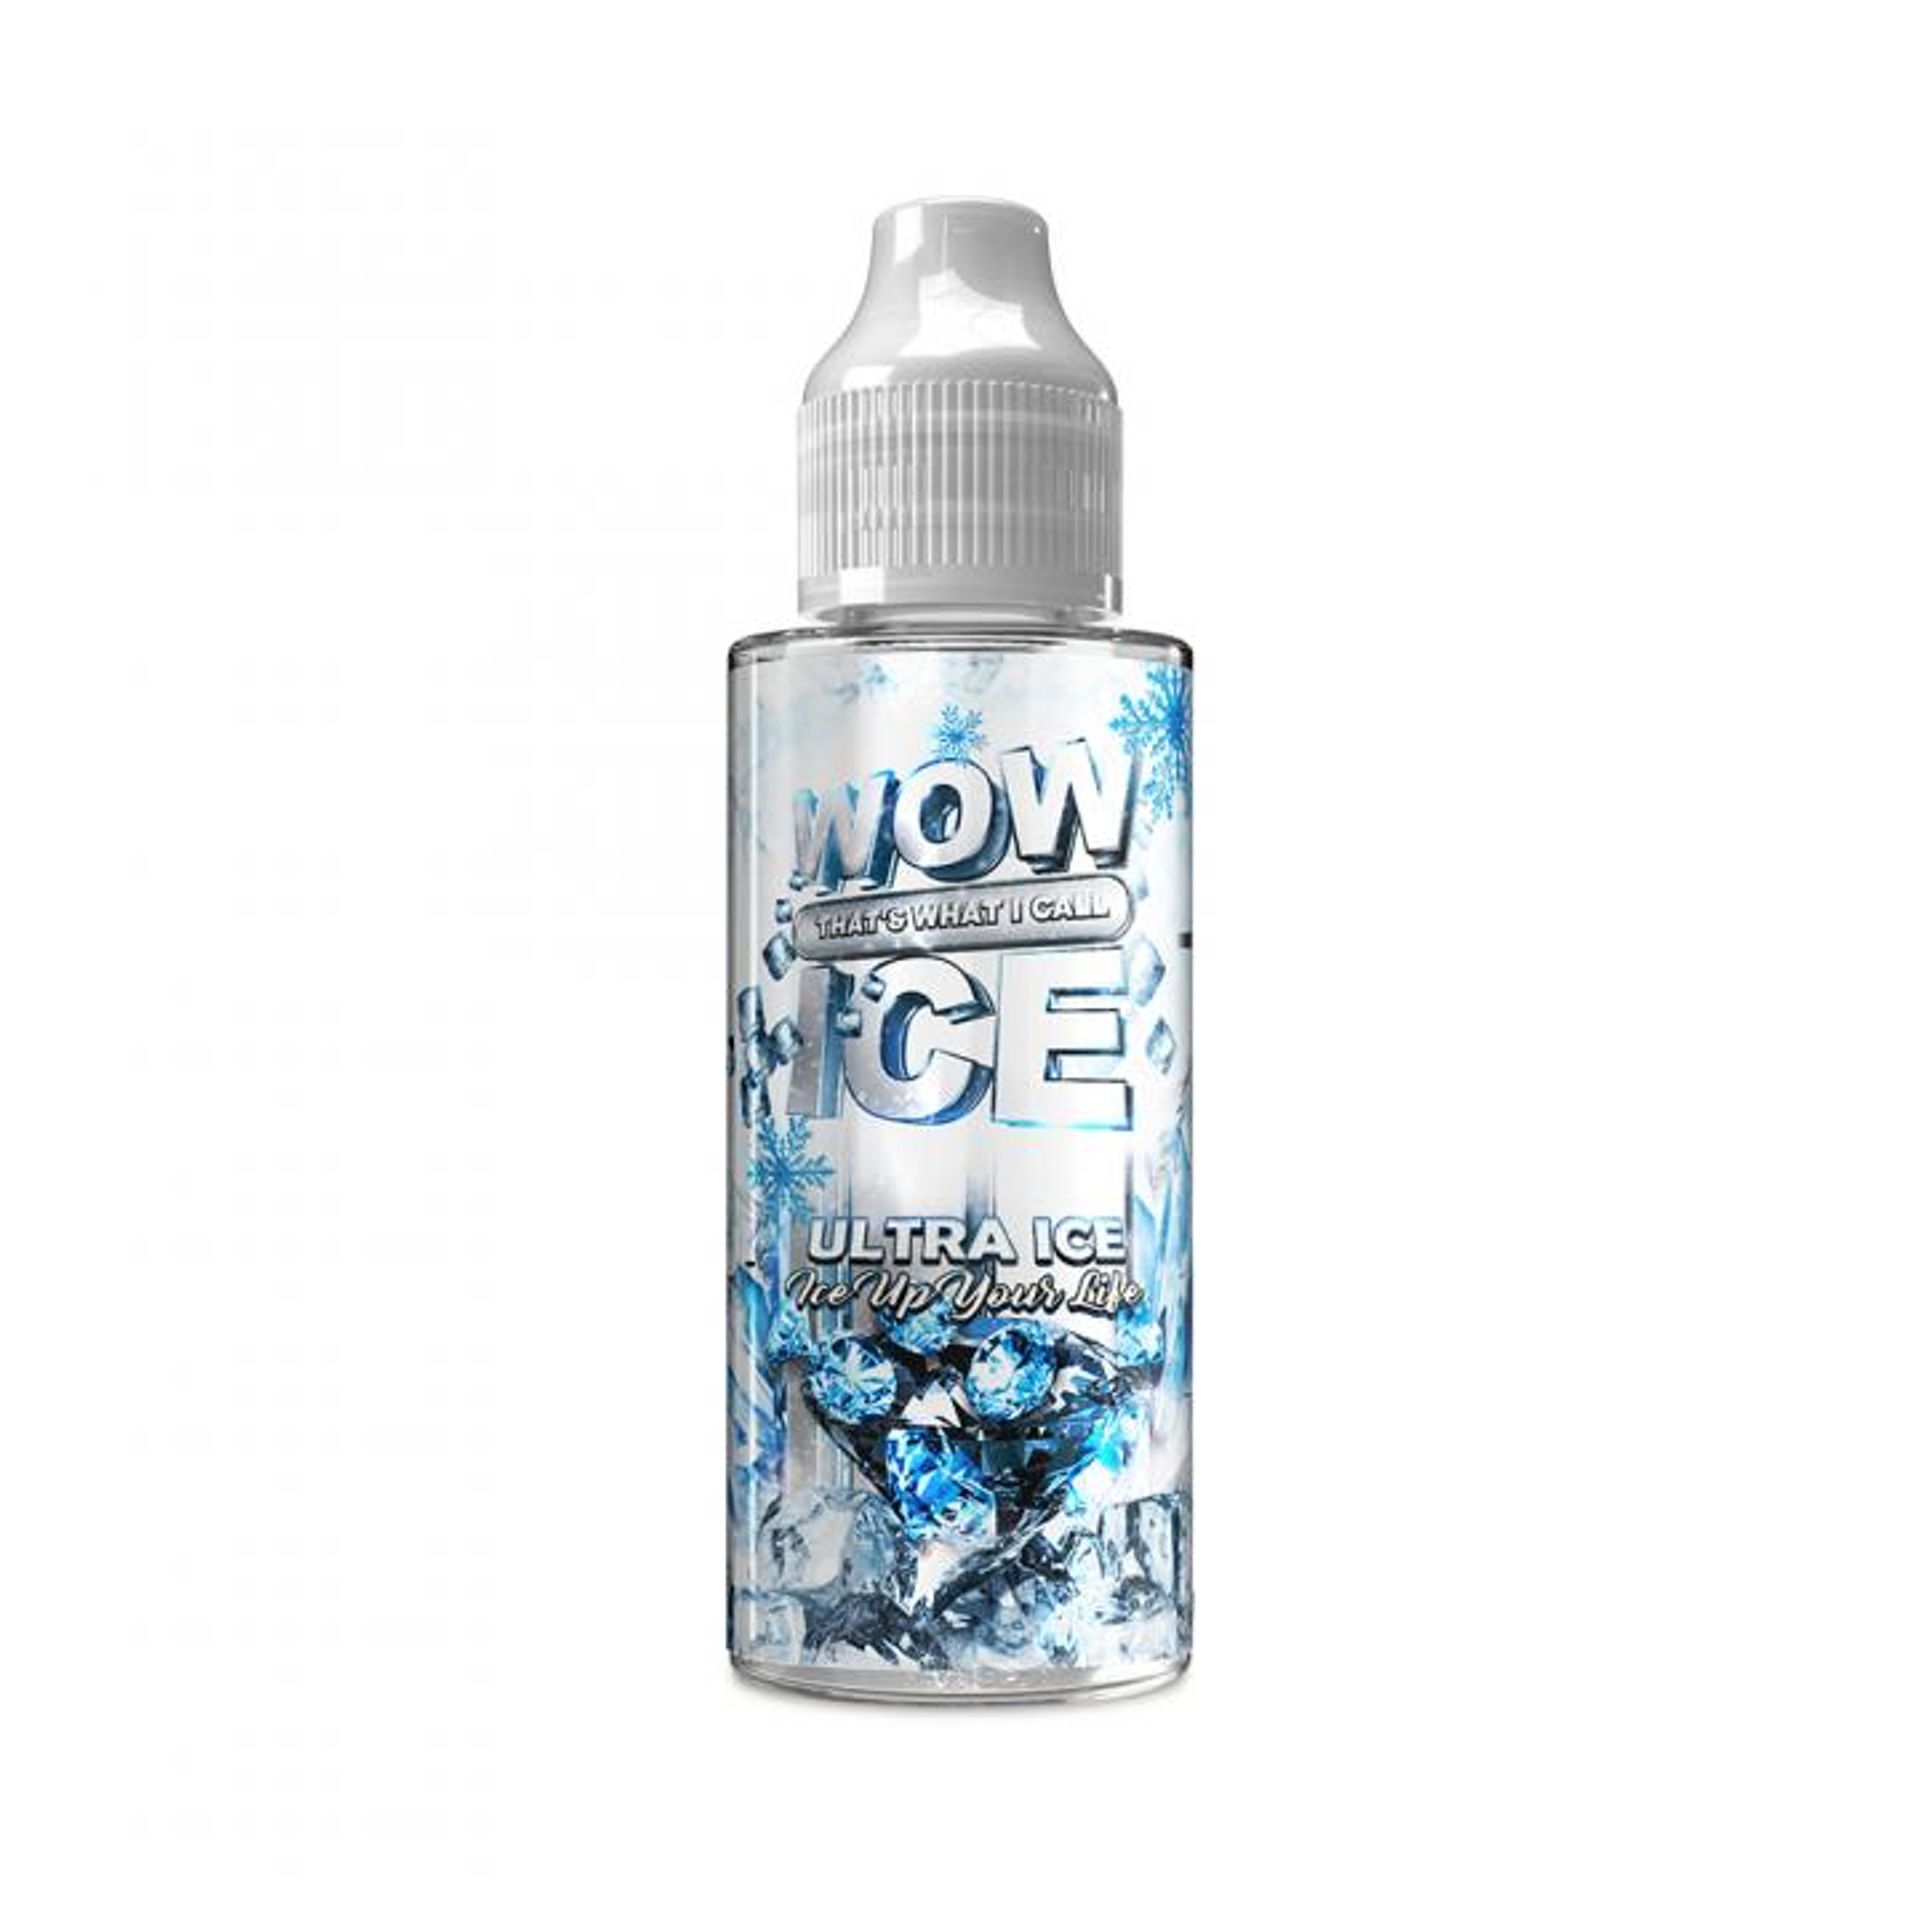 Image of Ultra Ice by Wow Thats What I Call